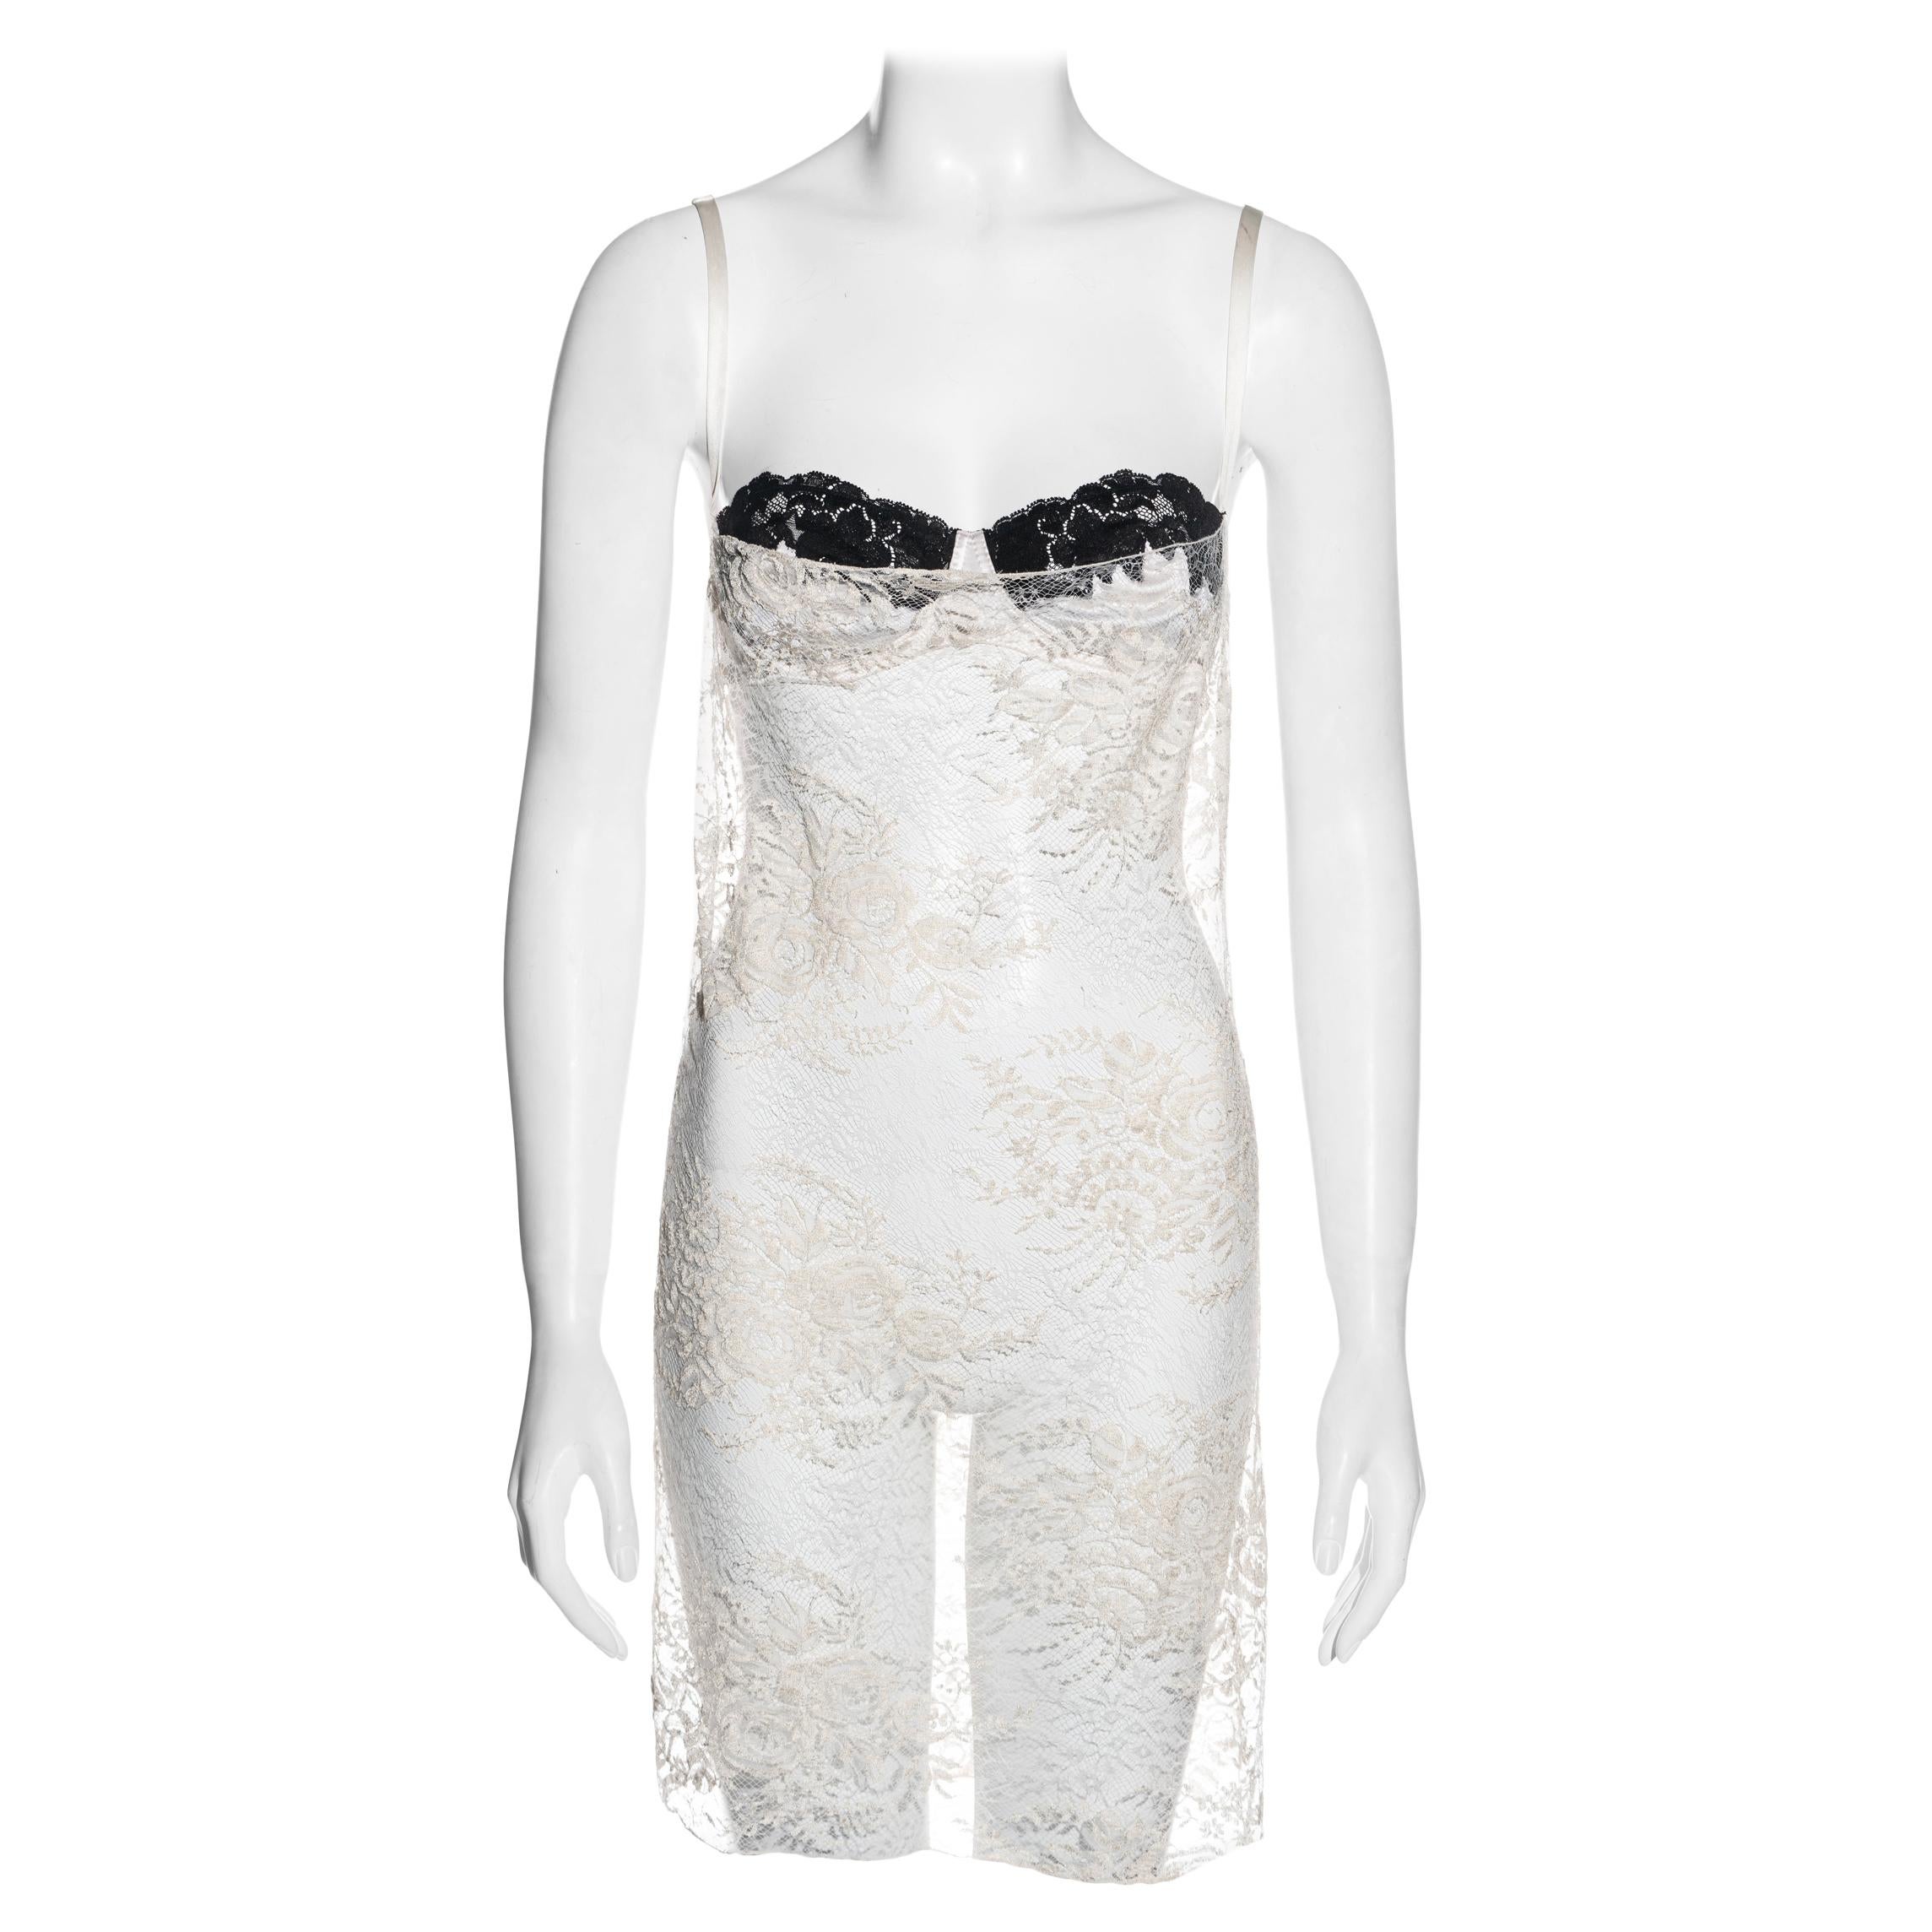 Dolce & Gabbana ivory lace slip dress with attached bra, fw 2001